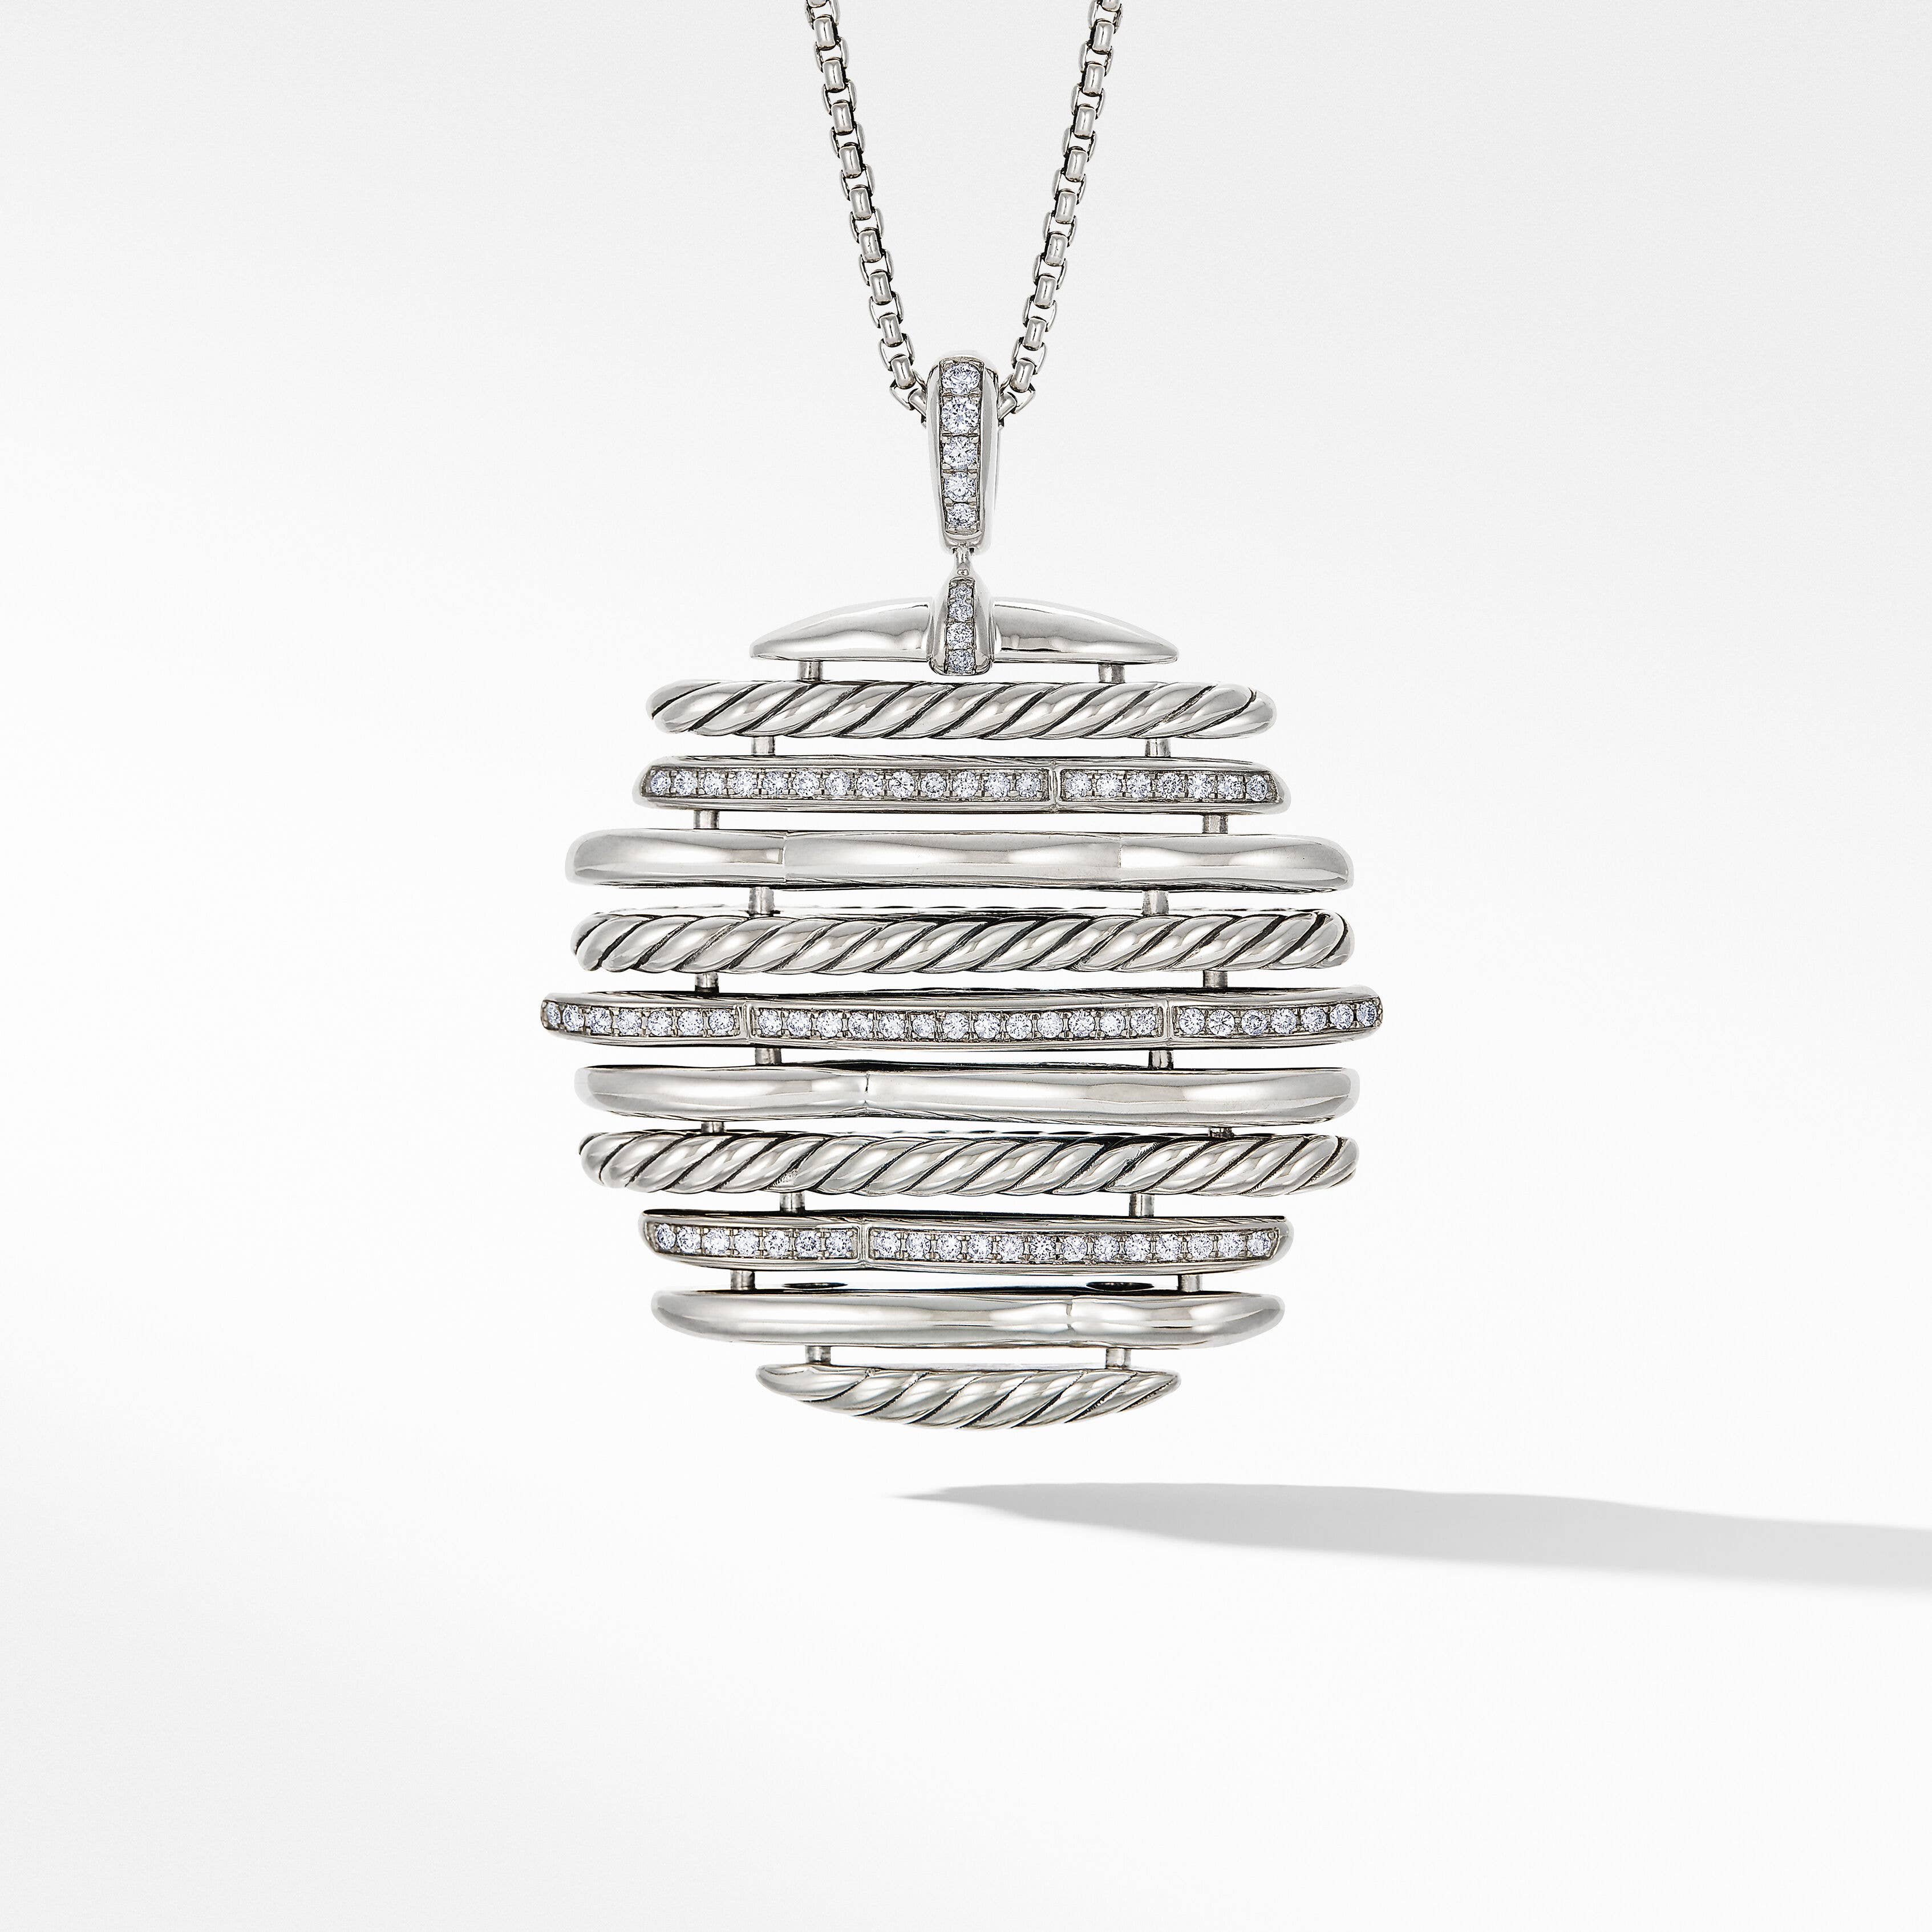 Tides Pendant Necklace in Sterling Silver with Diamonds, 45mm